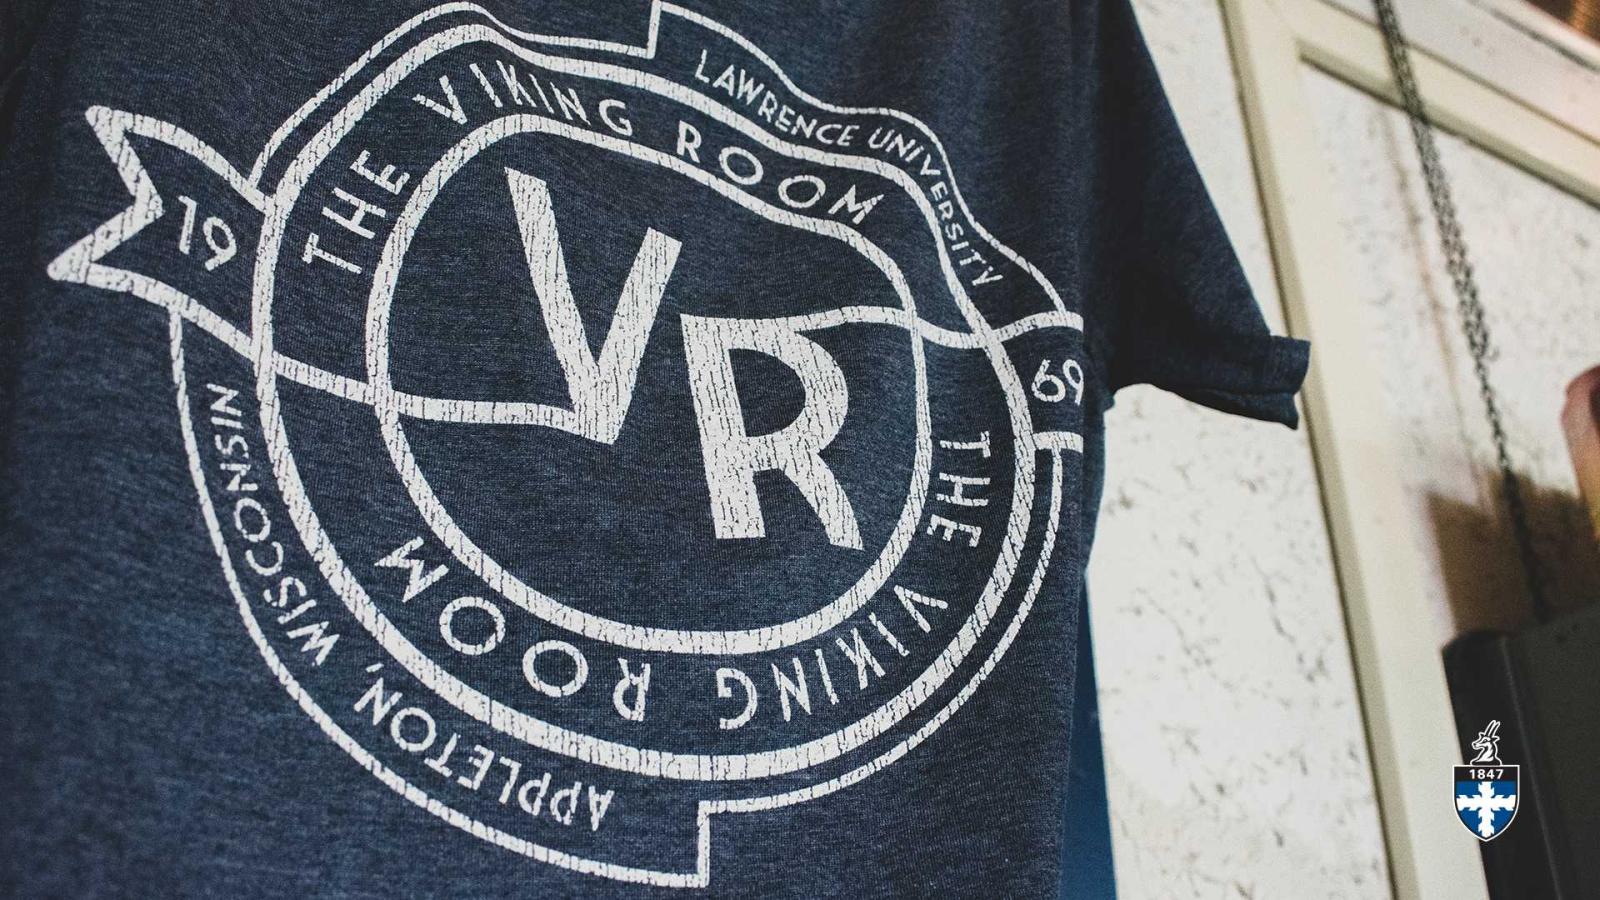 Close up of blue t-shirt that says, "The Viking Room".